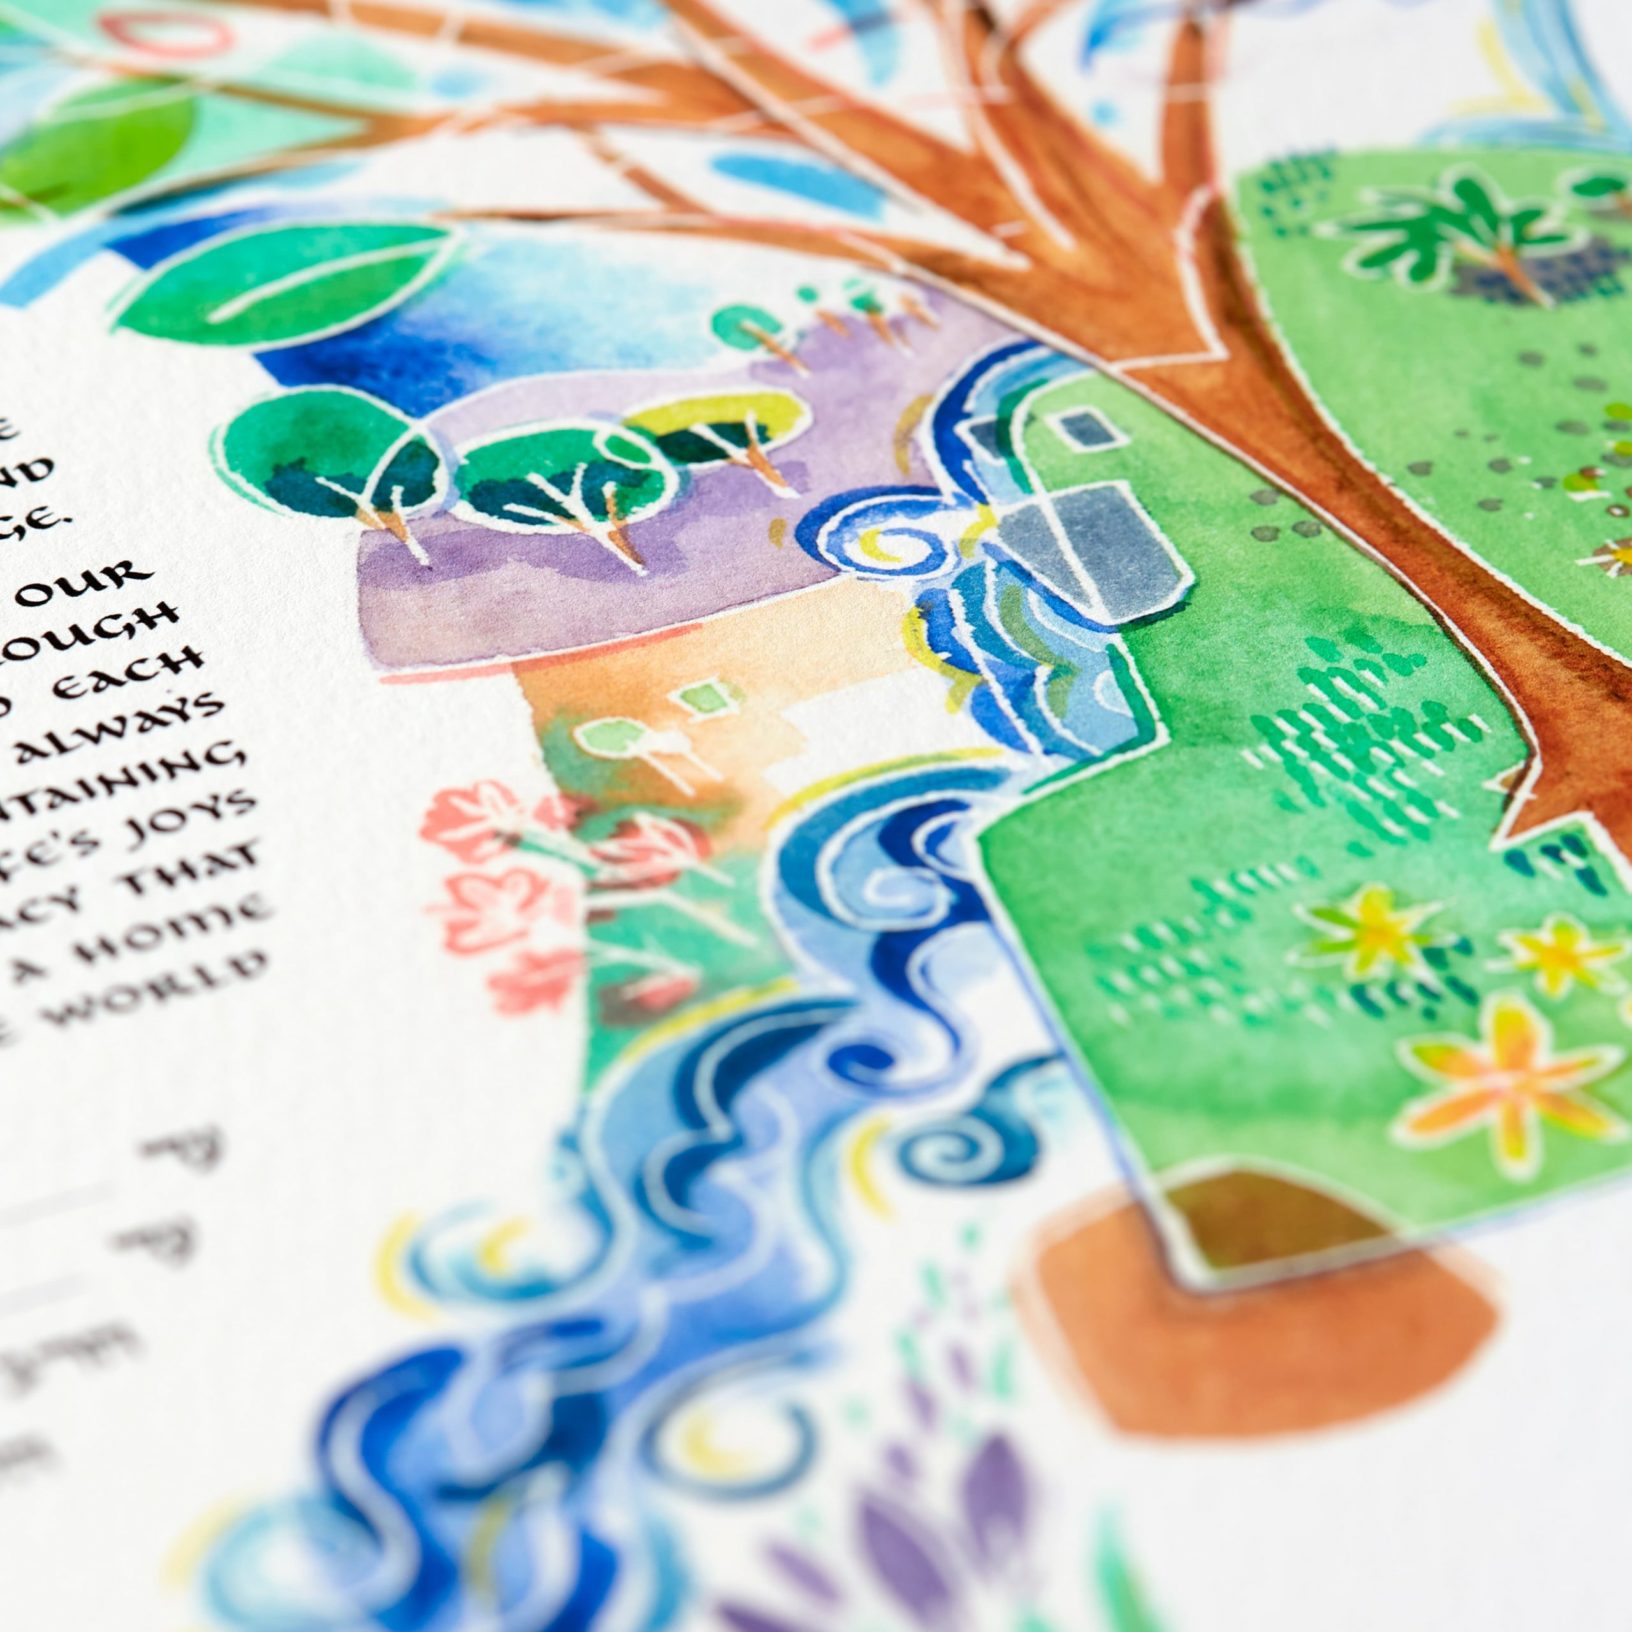 Serenity in Nature: Two Trees Ketubah Marriage Contracts by Risa Aqua